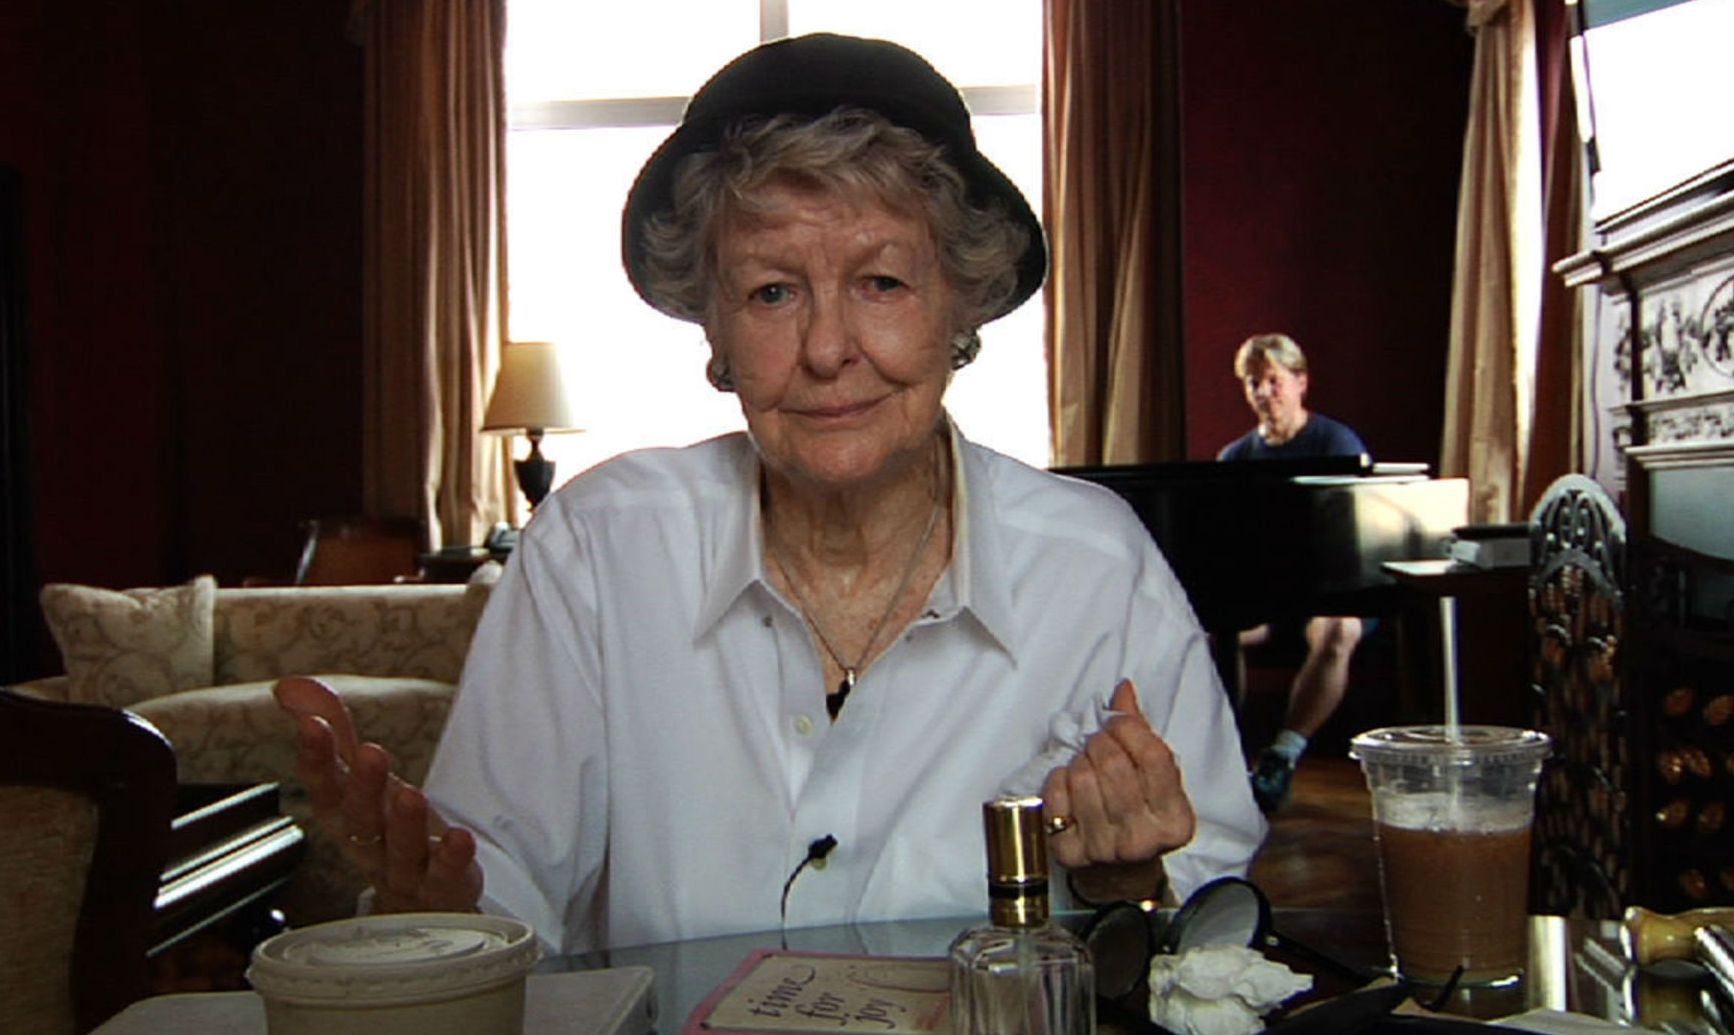 Elaine Stritch at home having a drink